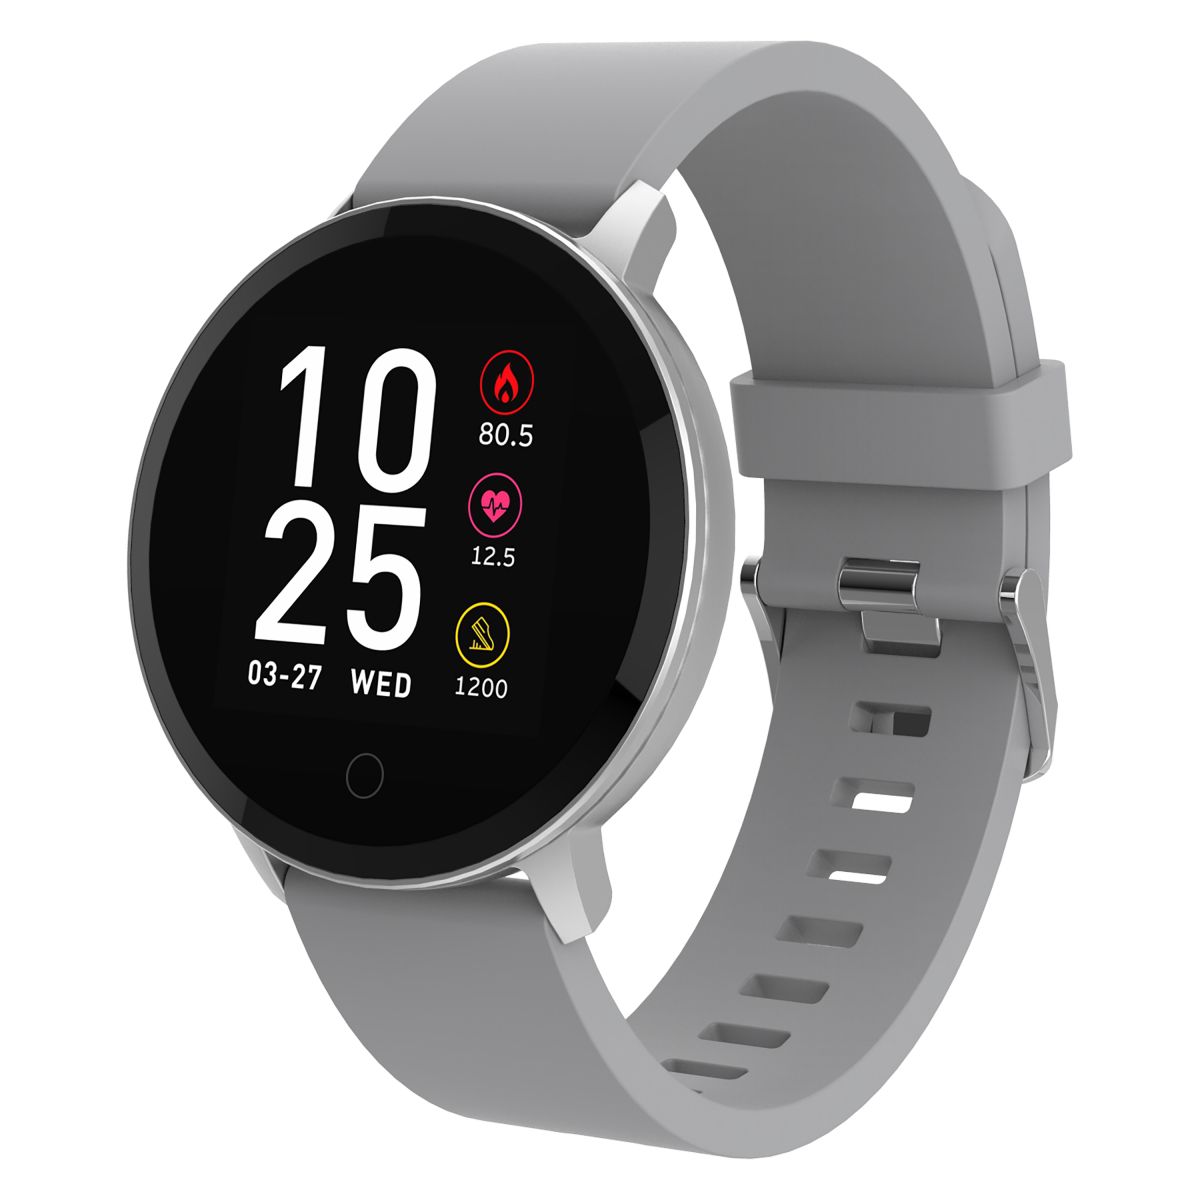 Volkano Smart Watch for Men or Women with Heart Rate Monitor - Trend Series